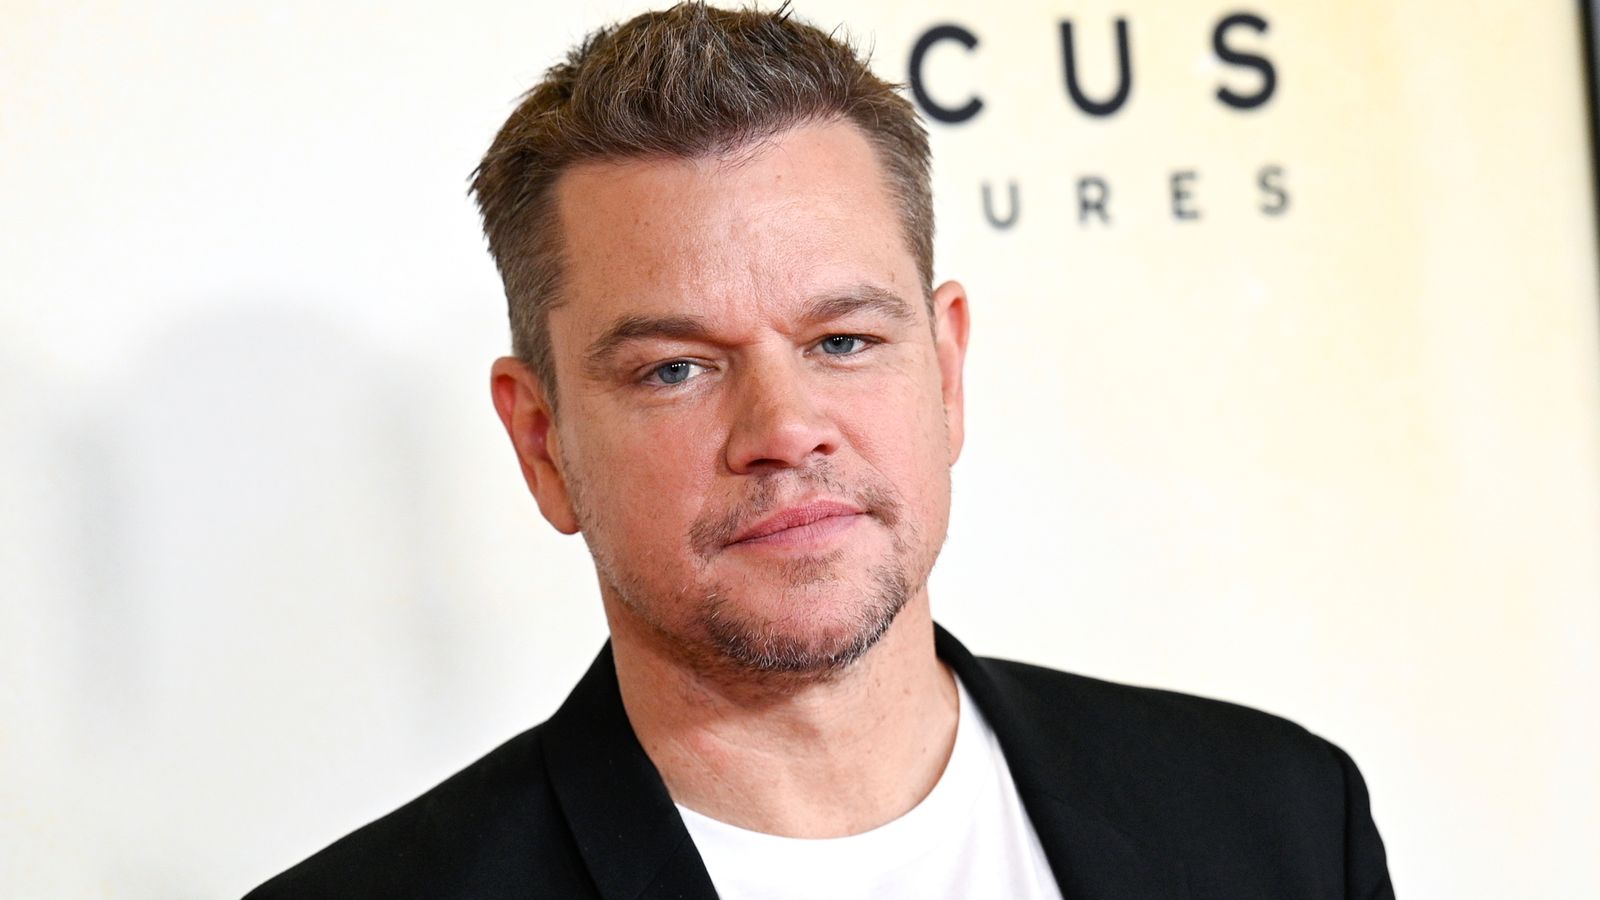 Matt Damon denies using homophobic slur and says he stands with LGBTQ+ community after interview backlash